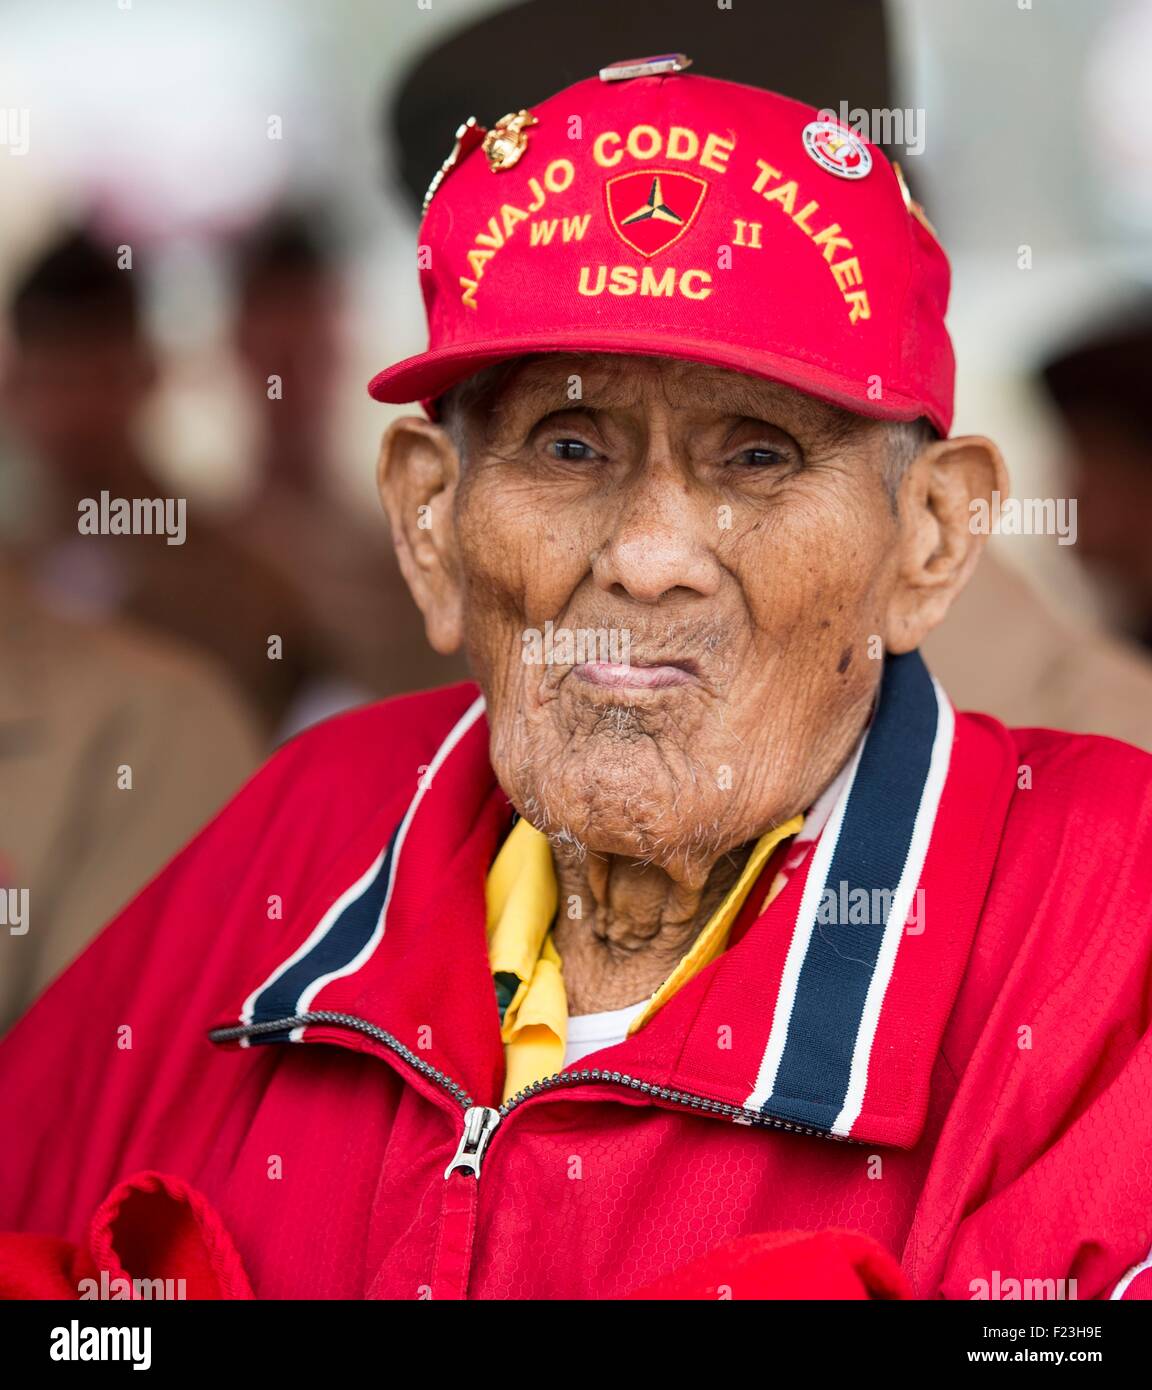 U.S. Marine Corps Cpl. Chester Nez during a rededication ceremony April 4, 2014 in Quantico, Virginia. Nez is the last of the original 29 Navajo Code Talkers of World War II. Stock Photo